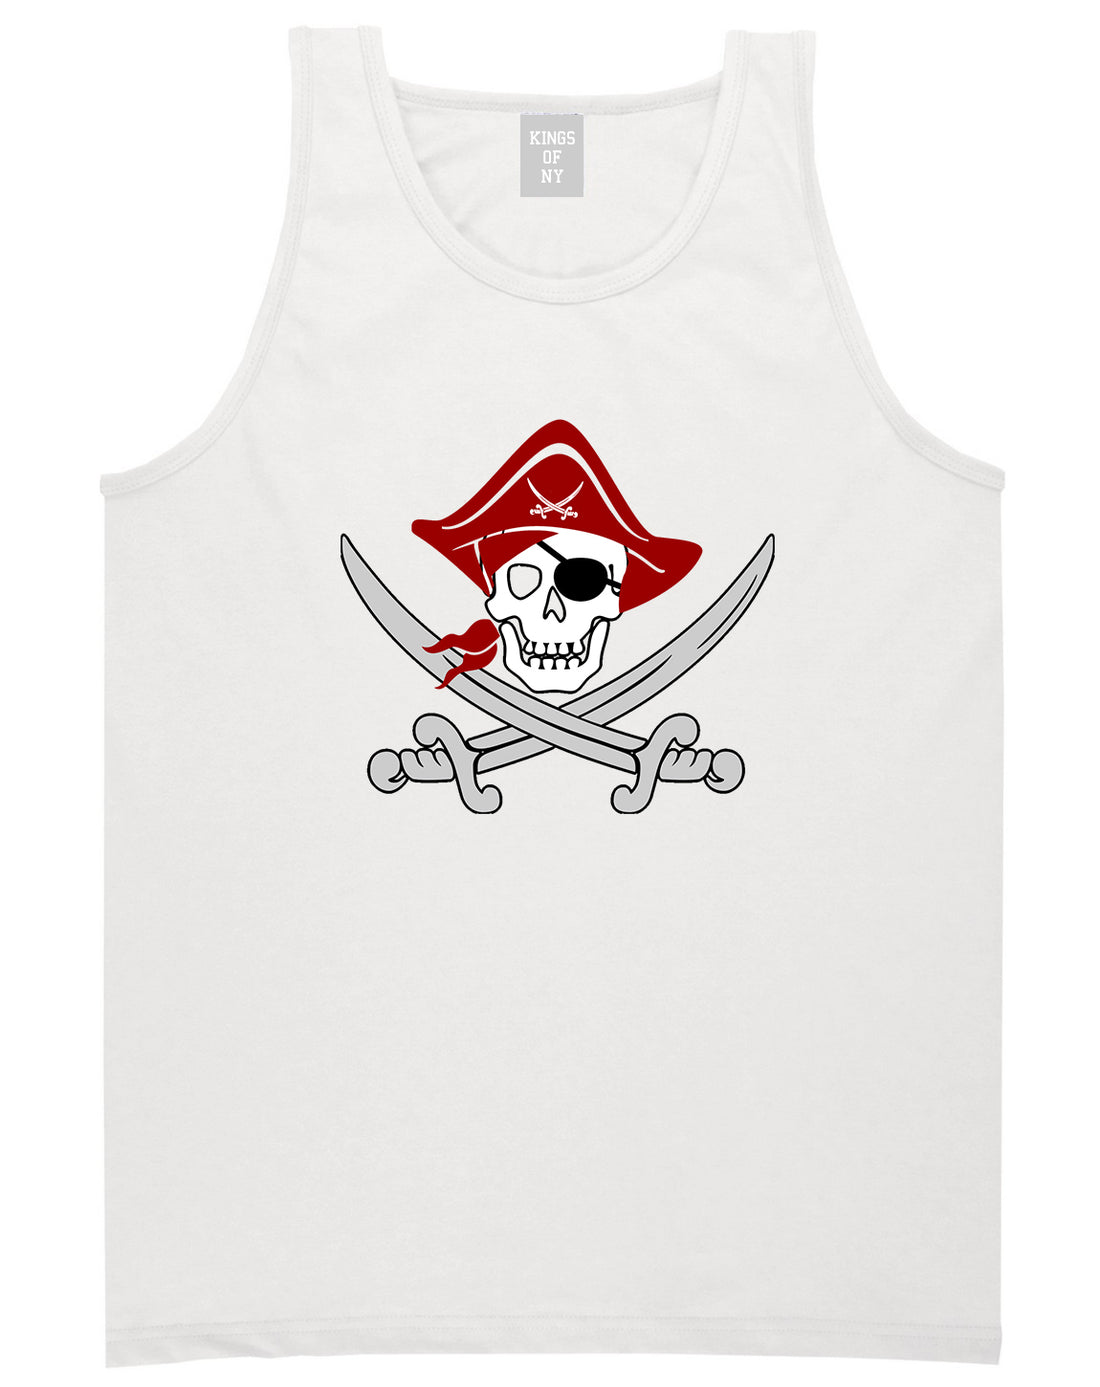 Pirate Captain And Swords Mens Tank Top Shirt White